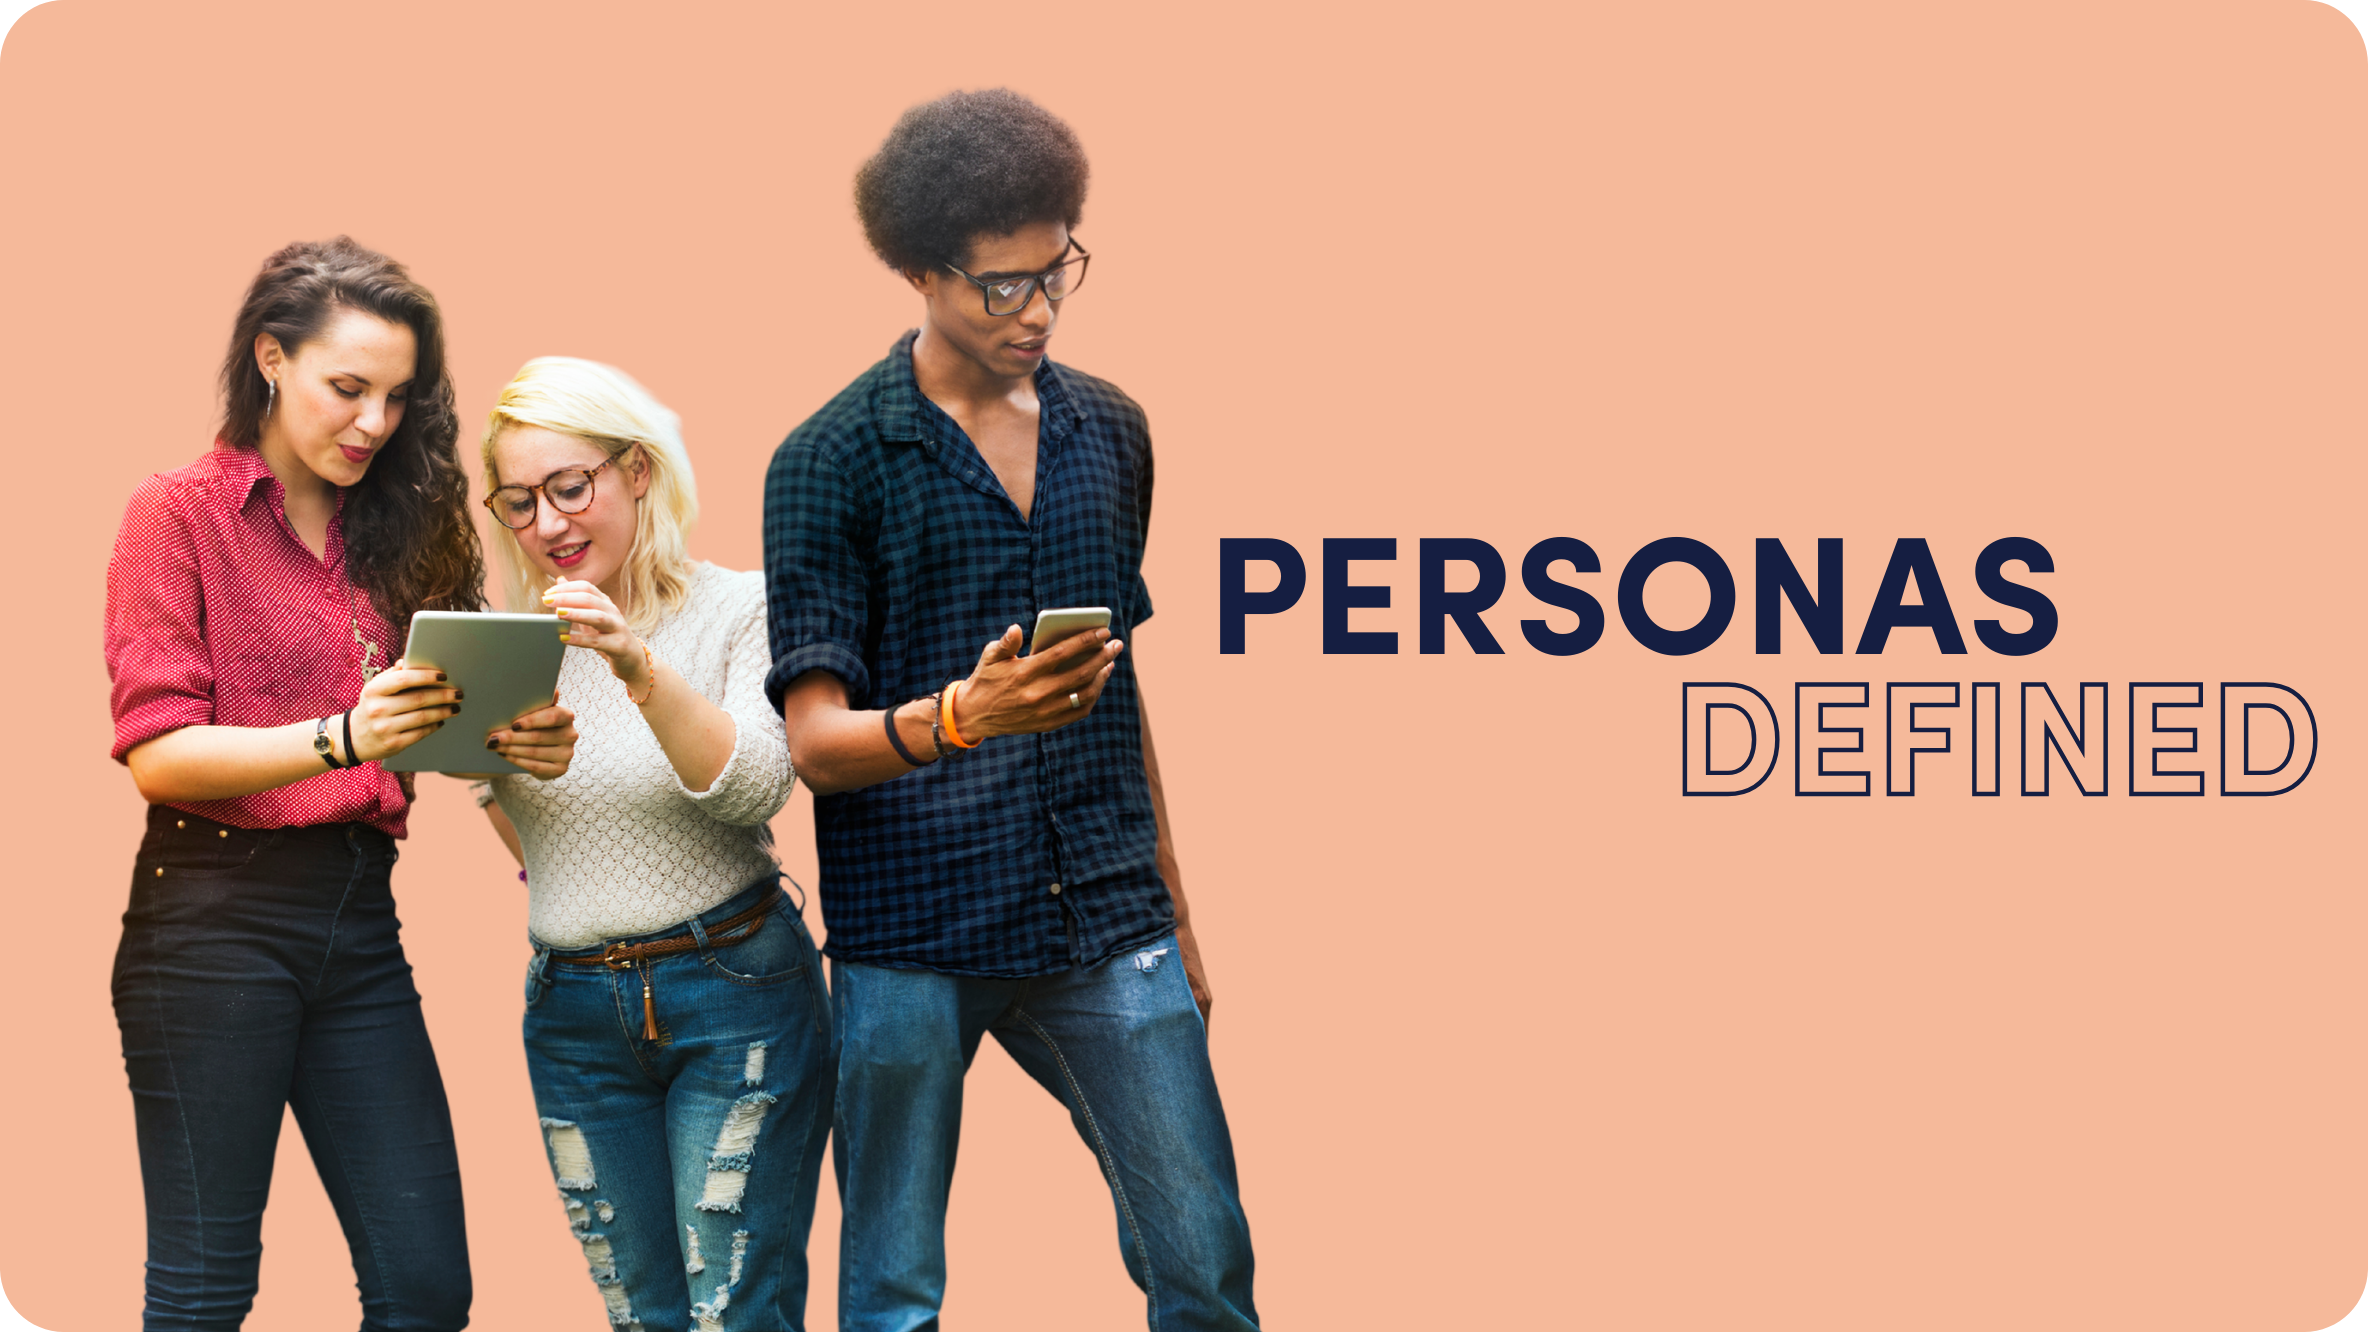 How to Build Buyer Personas in 4 Steps